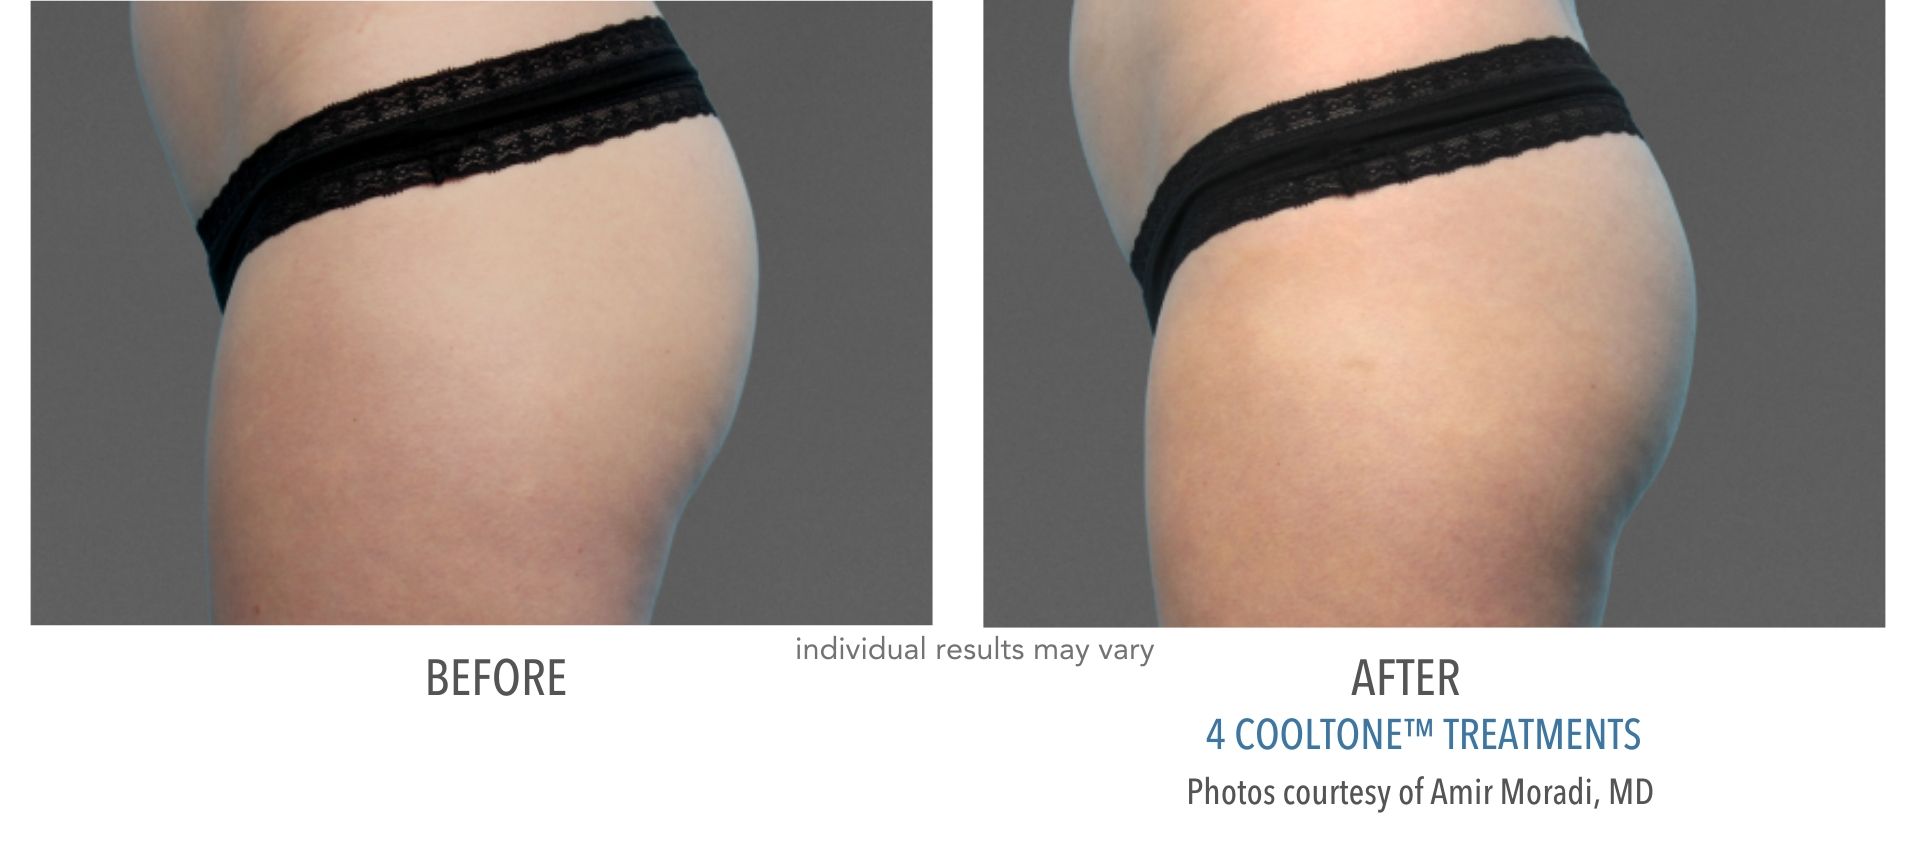 Cooltone results of female buttocks before and after at Laser + Skin Institute in Chatham, New Jersey.